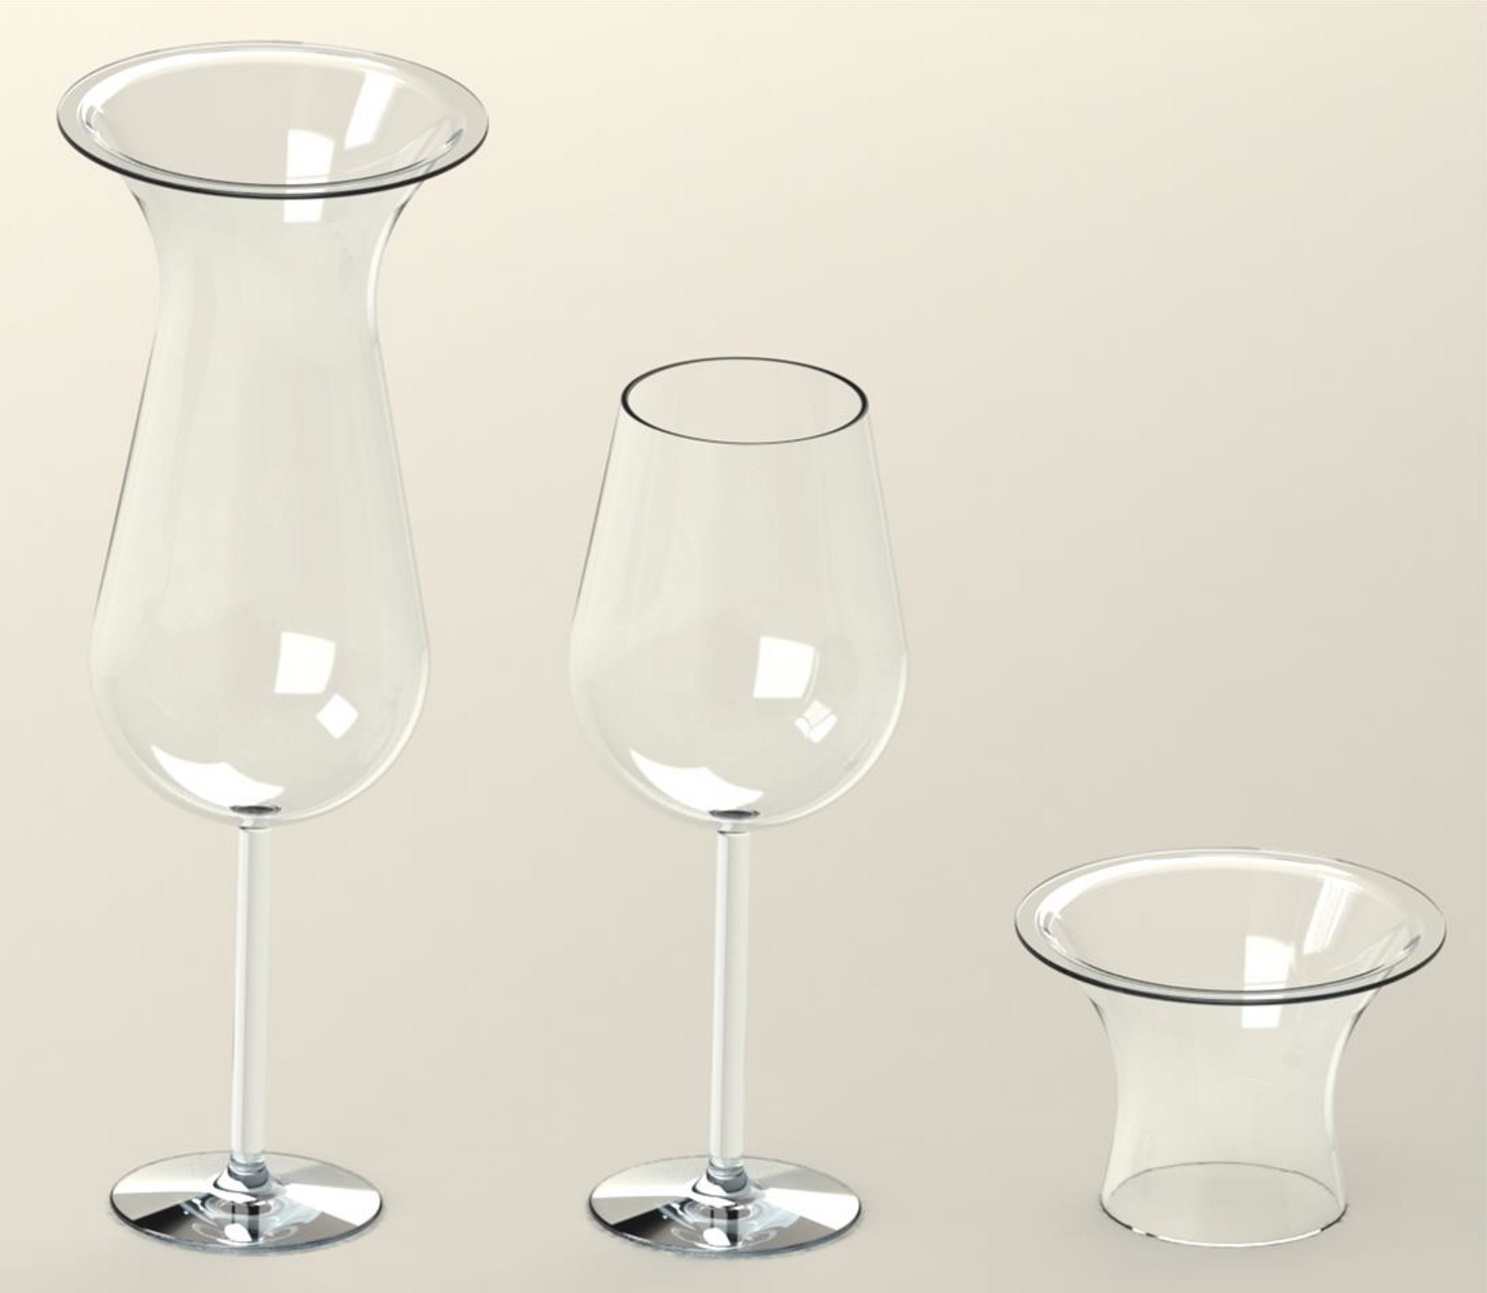 Figure 2: Wine glass before and after cap removal.